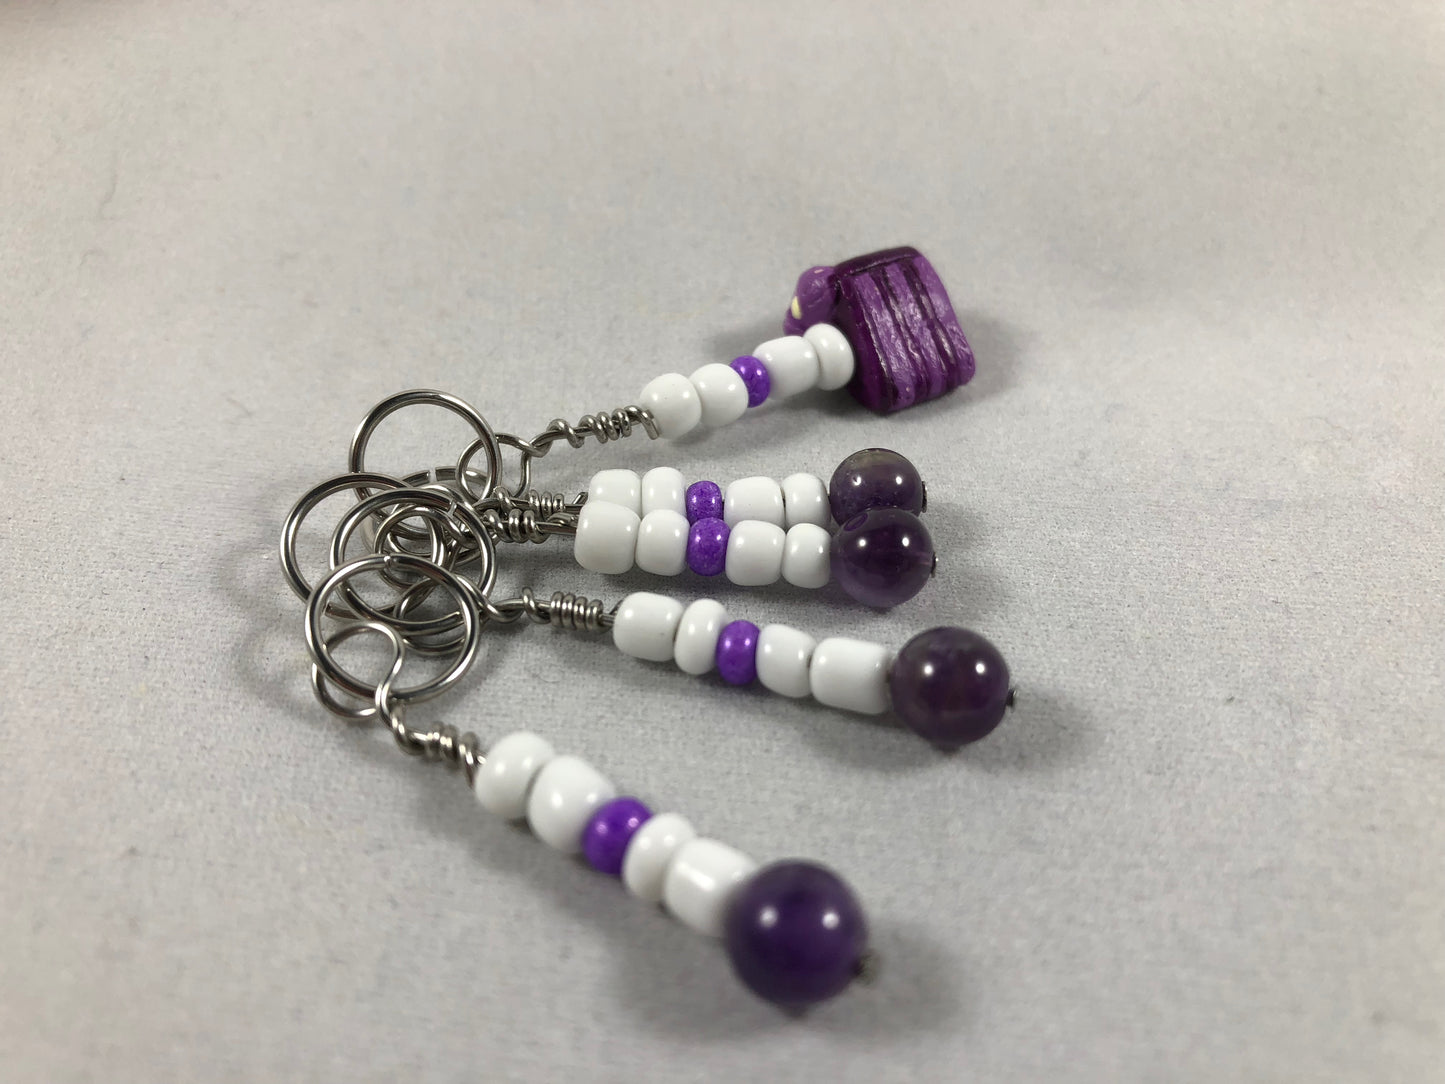 Crazy Birthday Cake Stitch Markers - Multiple Choices